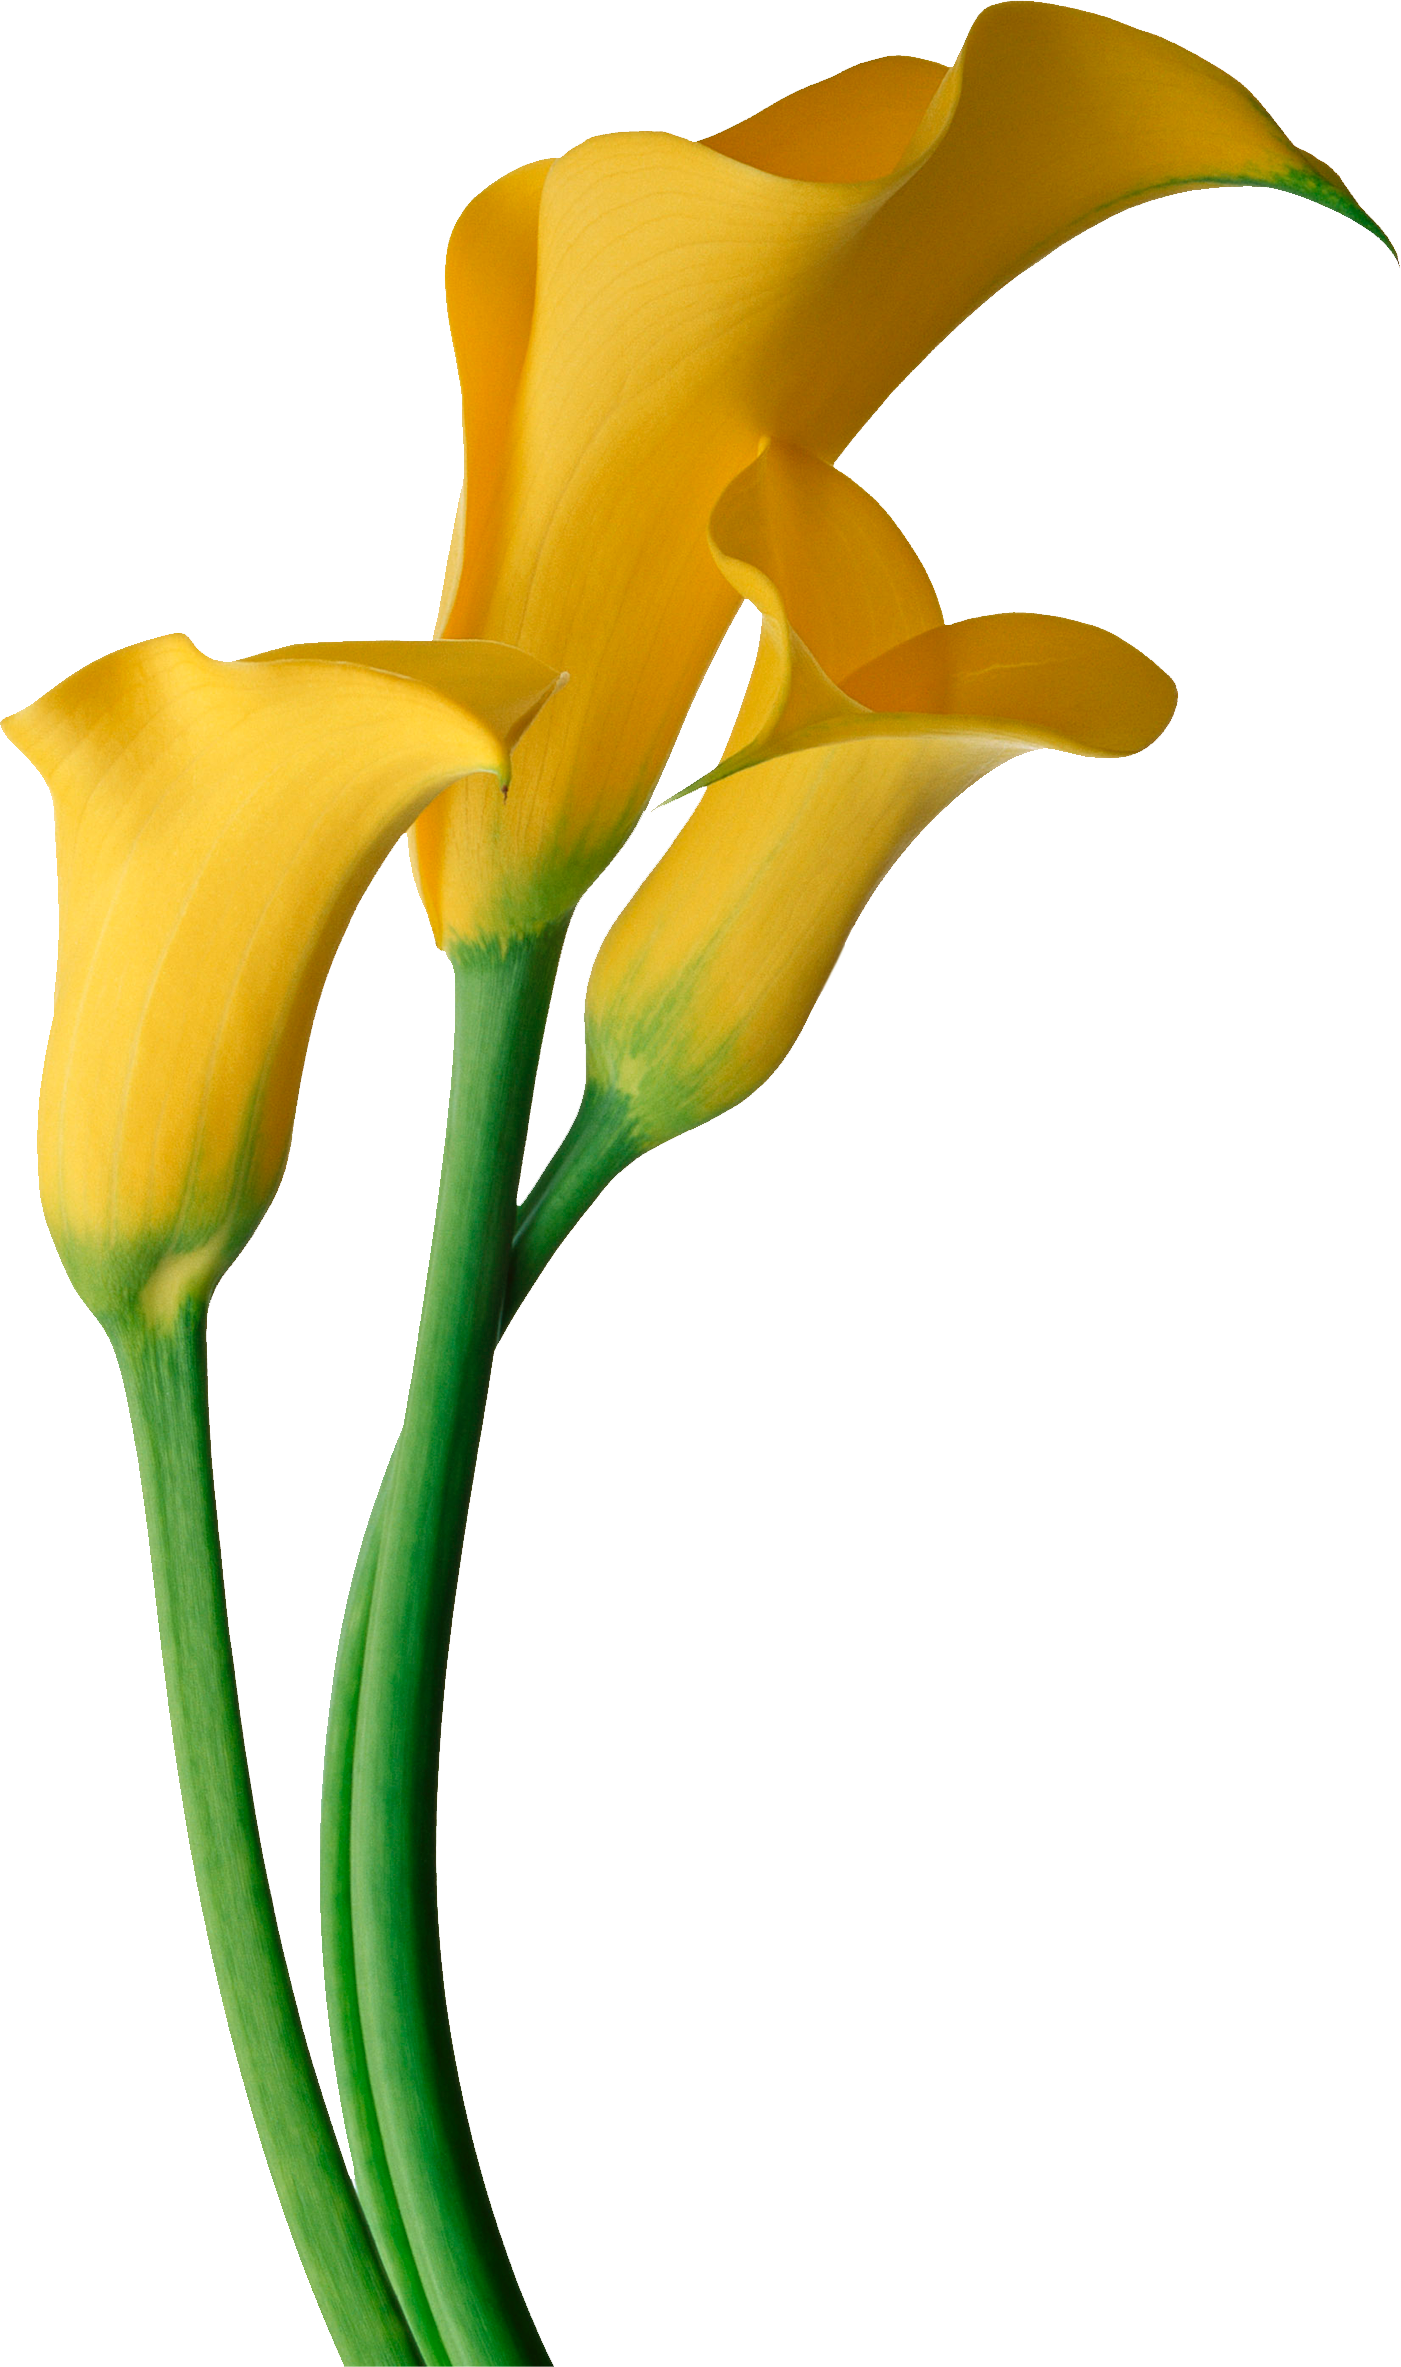 Art Images, Flower Clipart, Lilies Flowers, Calla Lily, - Calla Lily Flower Png (1401x2367)